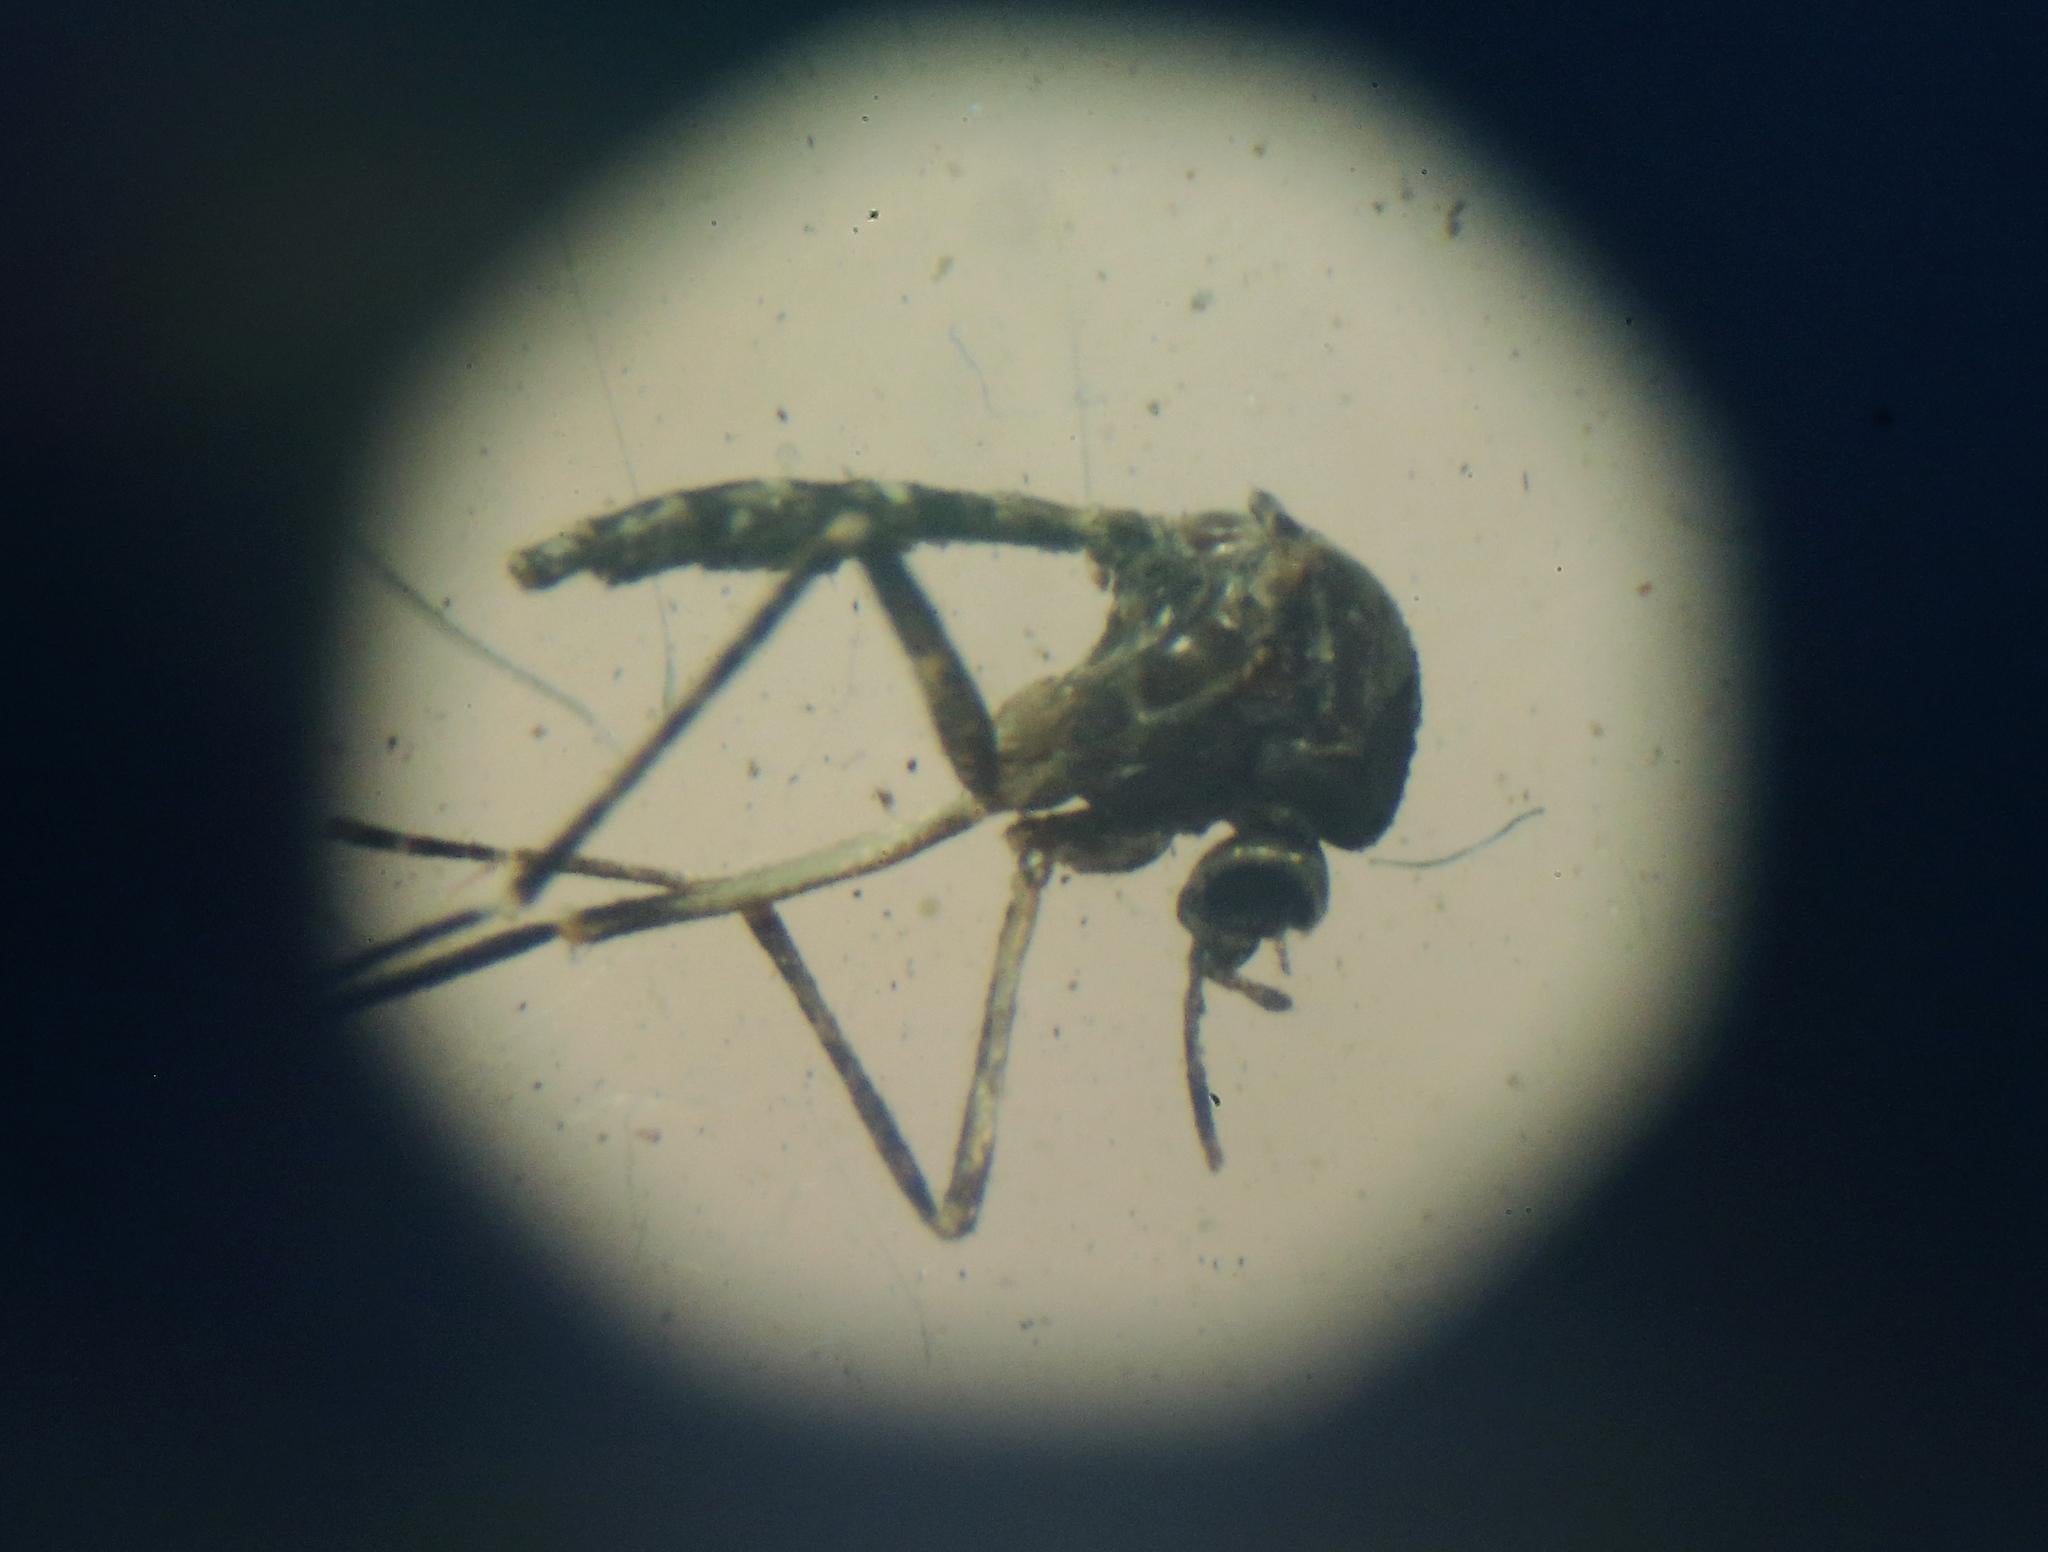 The Aedes aegypti mosquito, which transmits both Zika and dengue fever